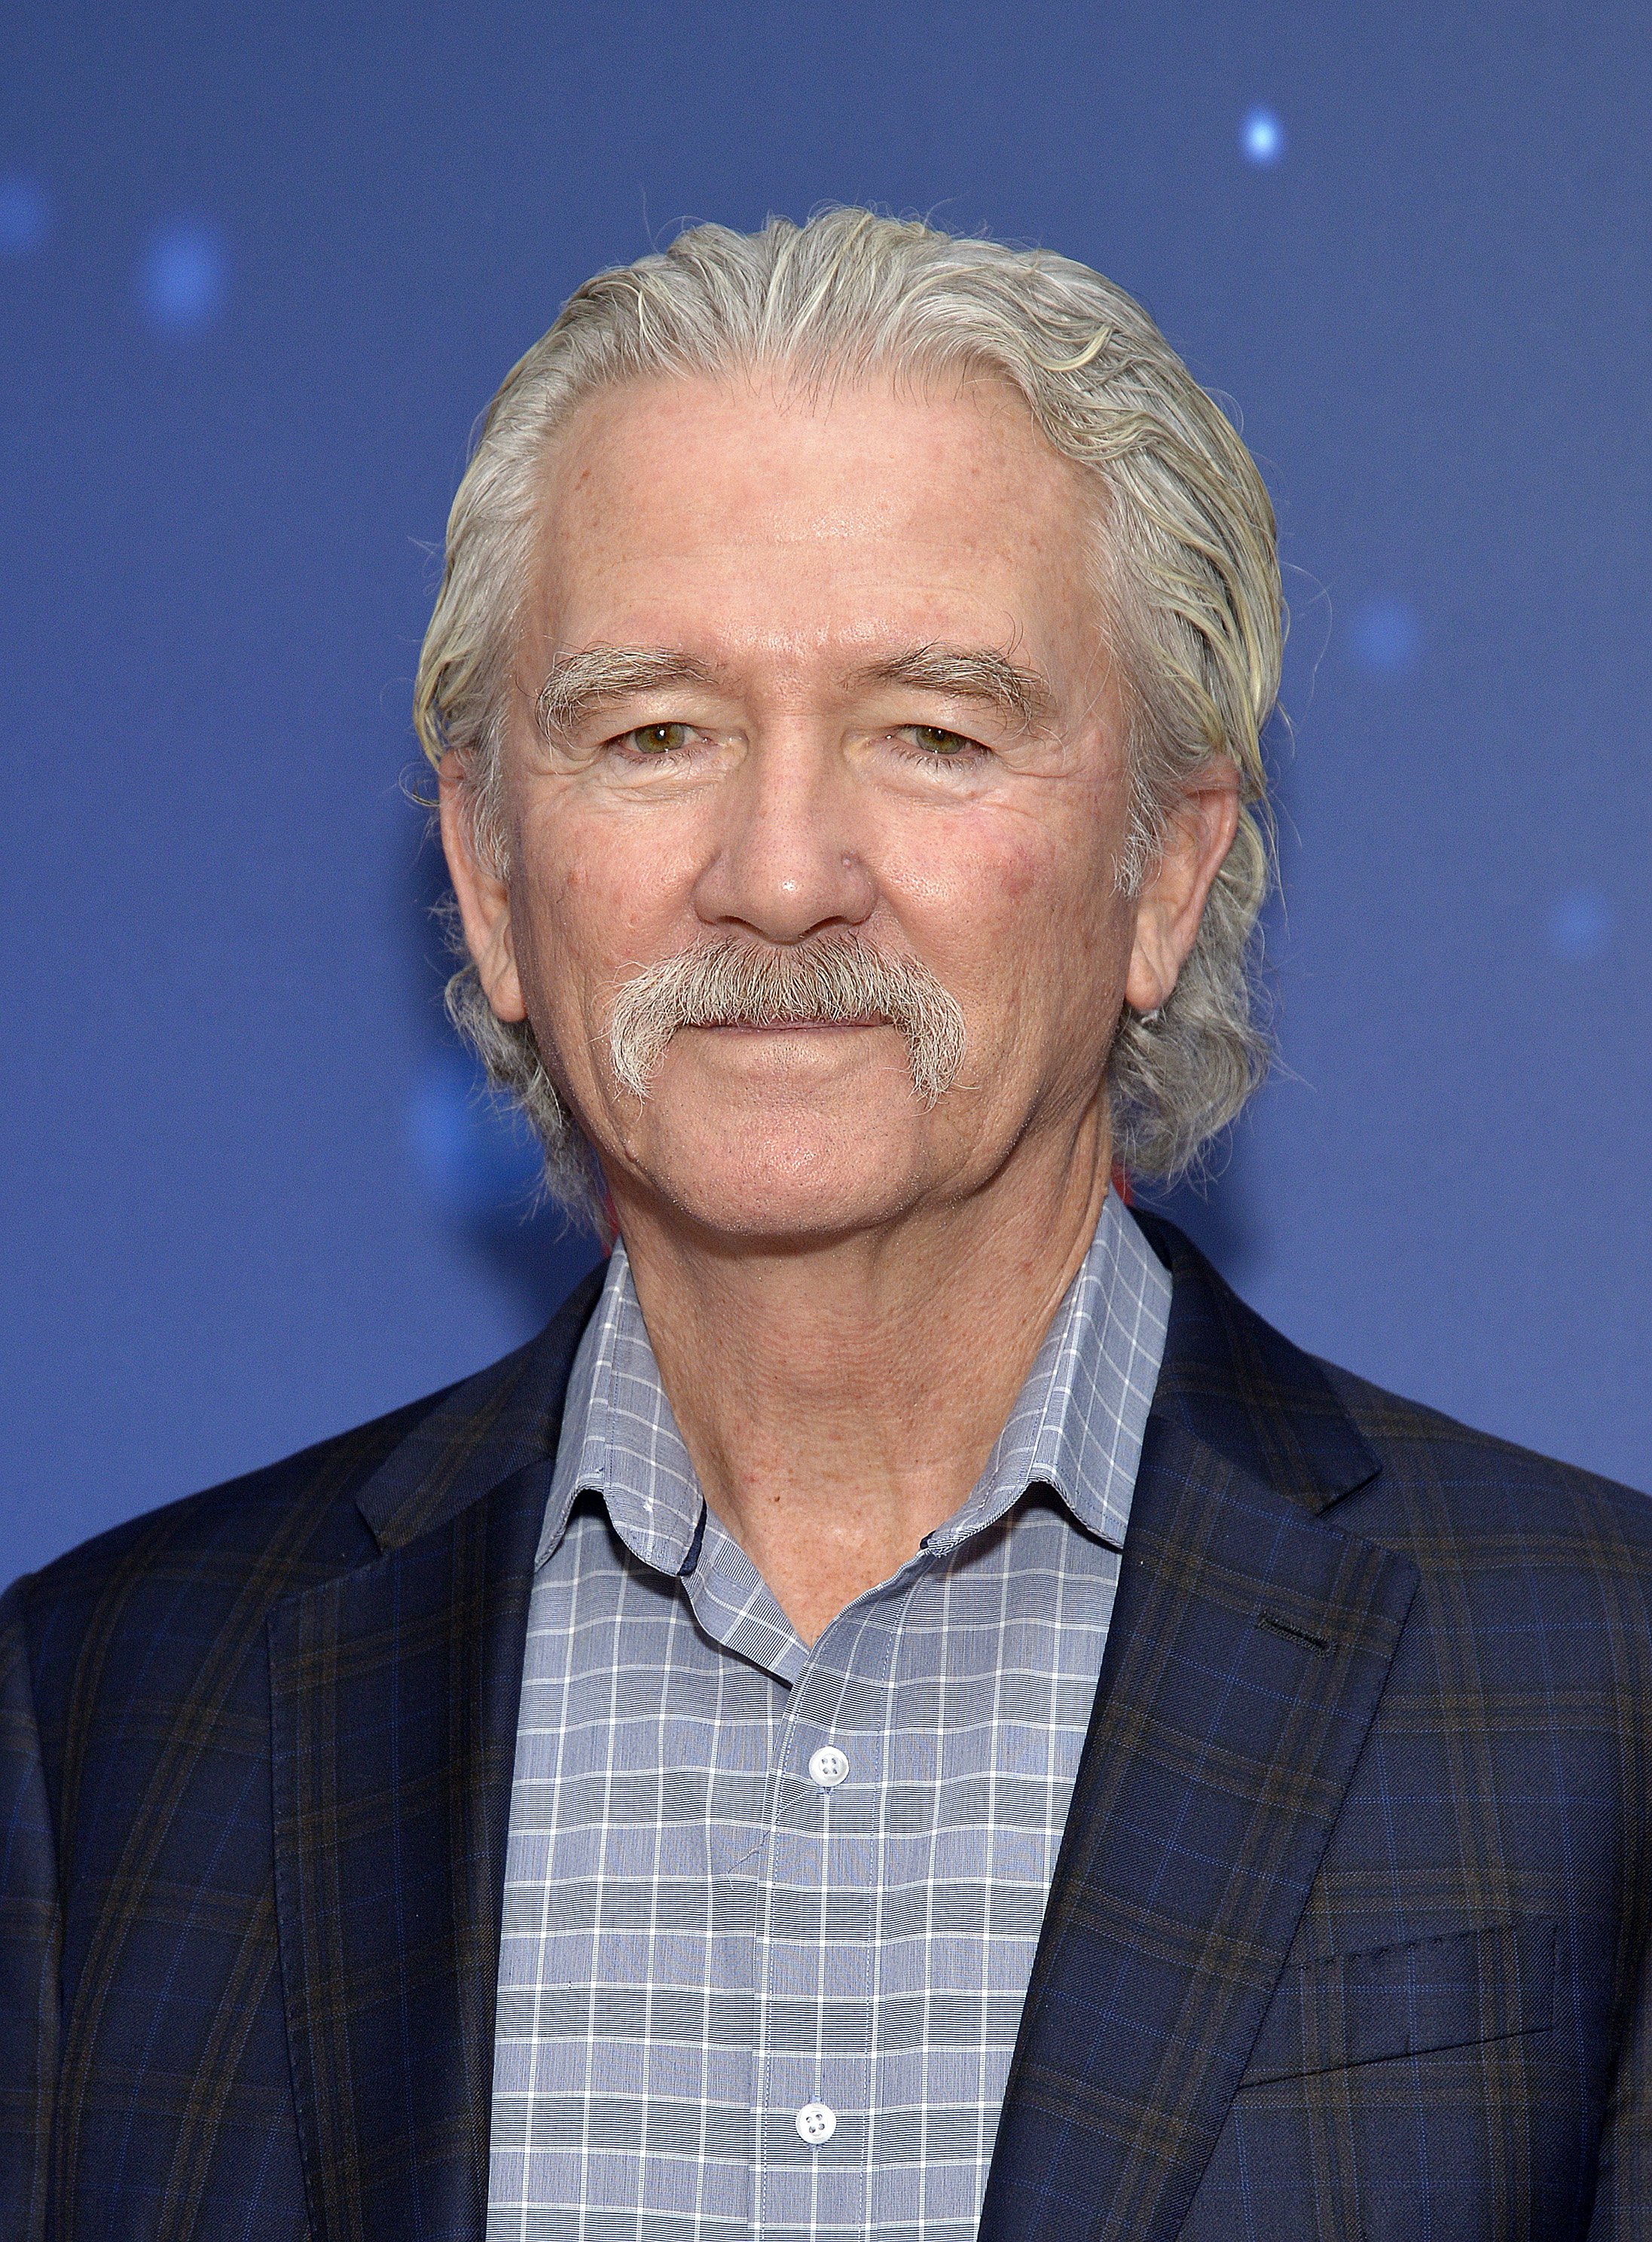 Patrick Duffy attends Say "Santa!" with It's A Wonderful Lifetime photo experience at Glendale Galleria on November 09, 2019, in Glendale, California. | Source: Getty Images